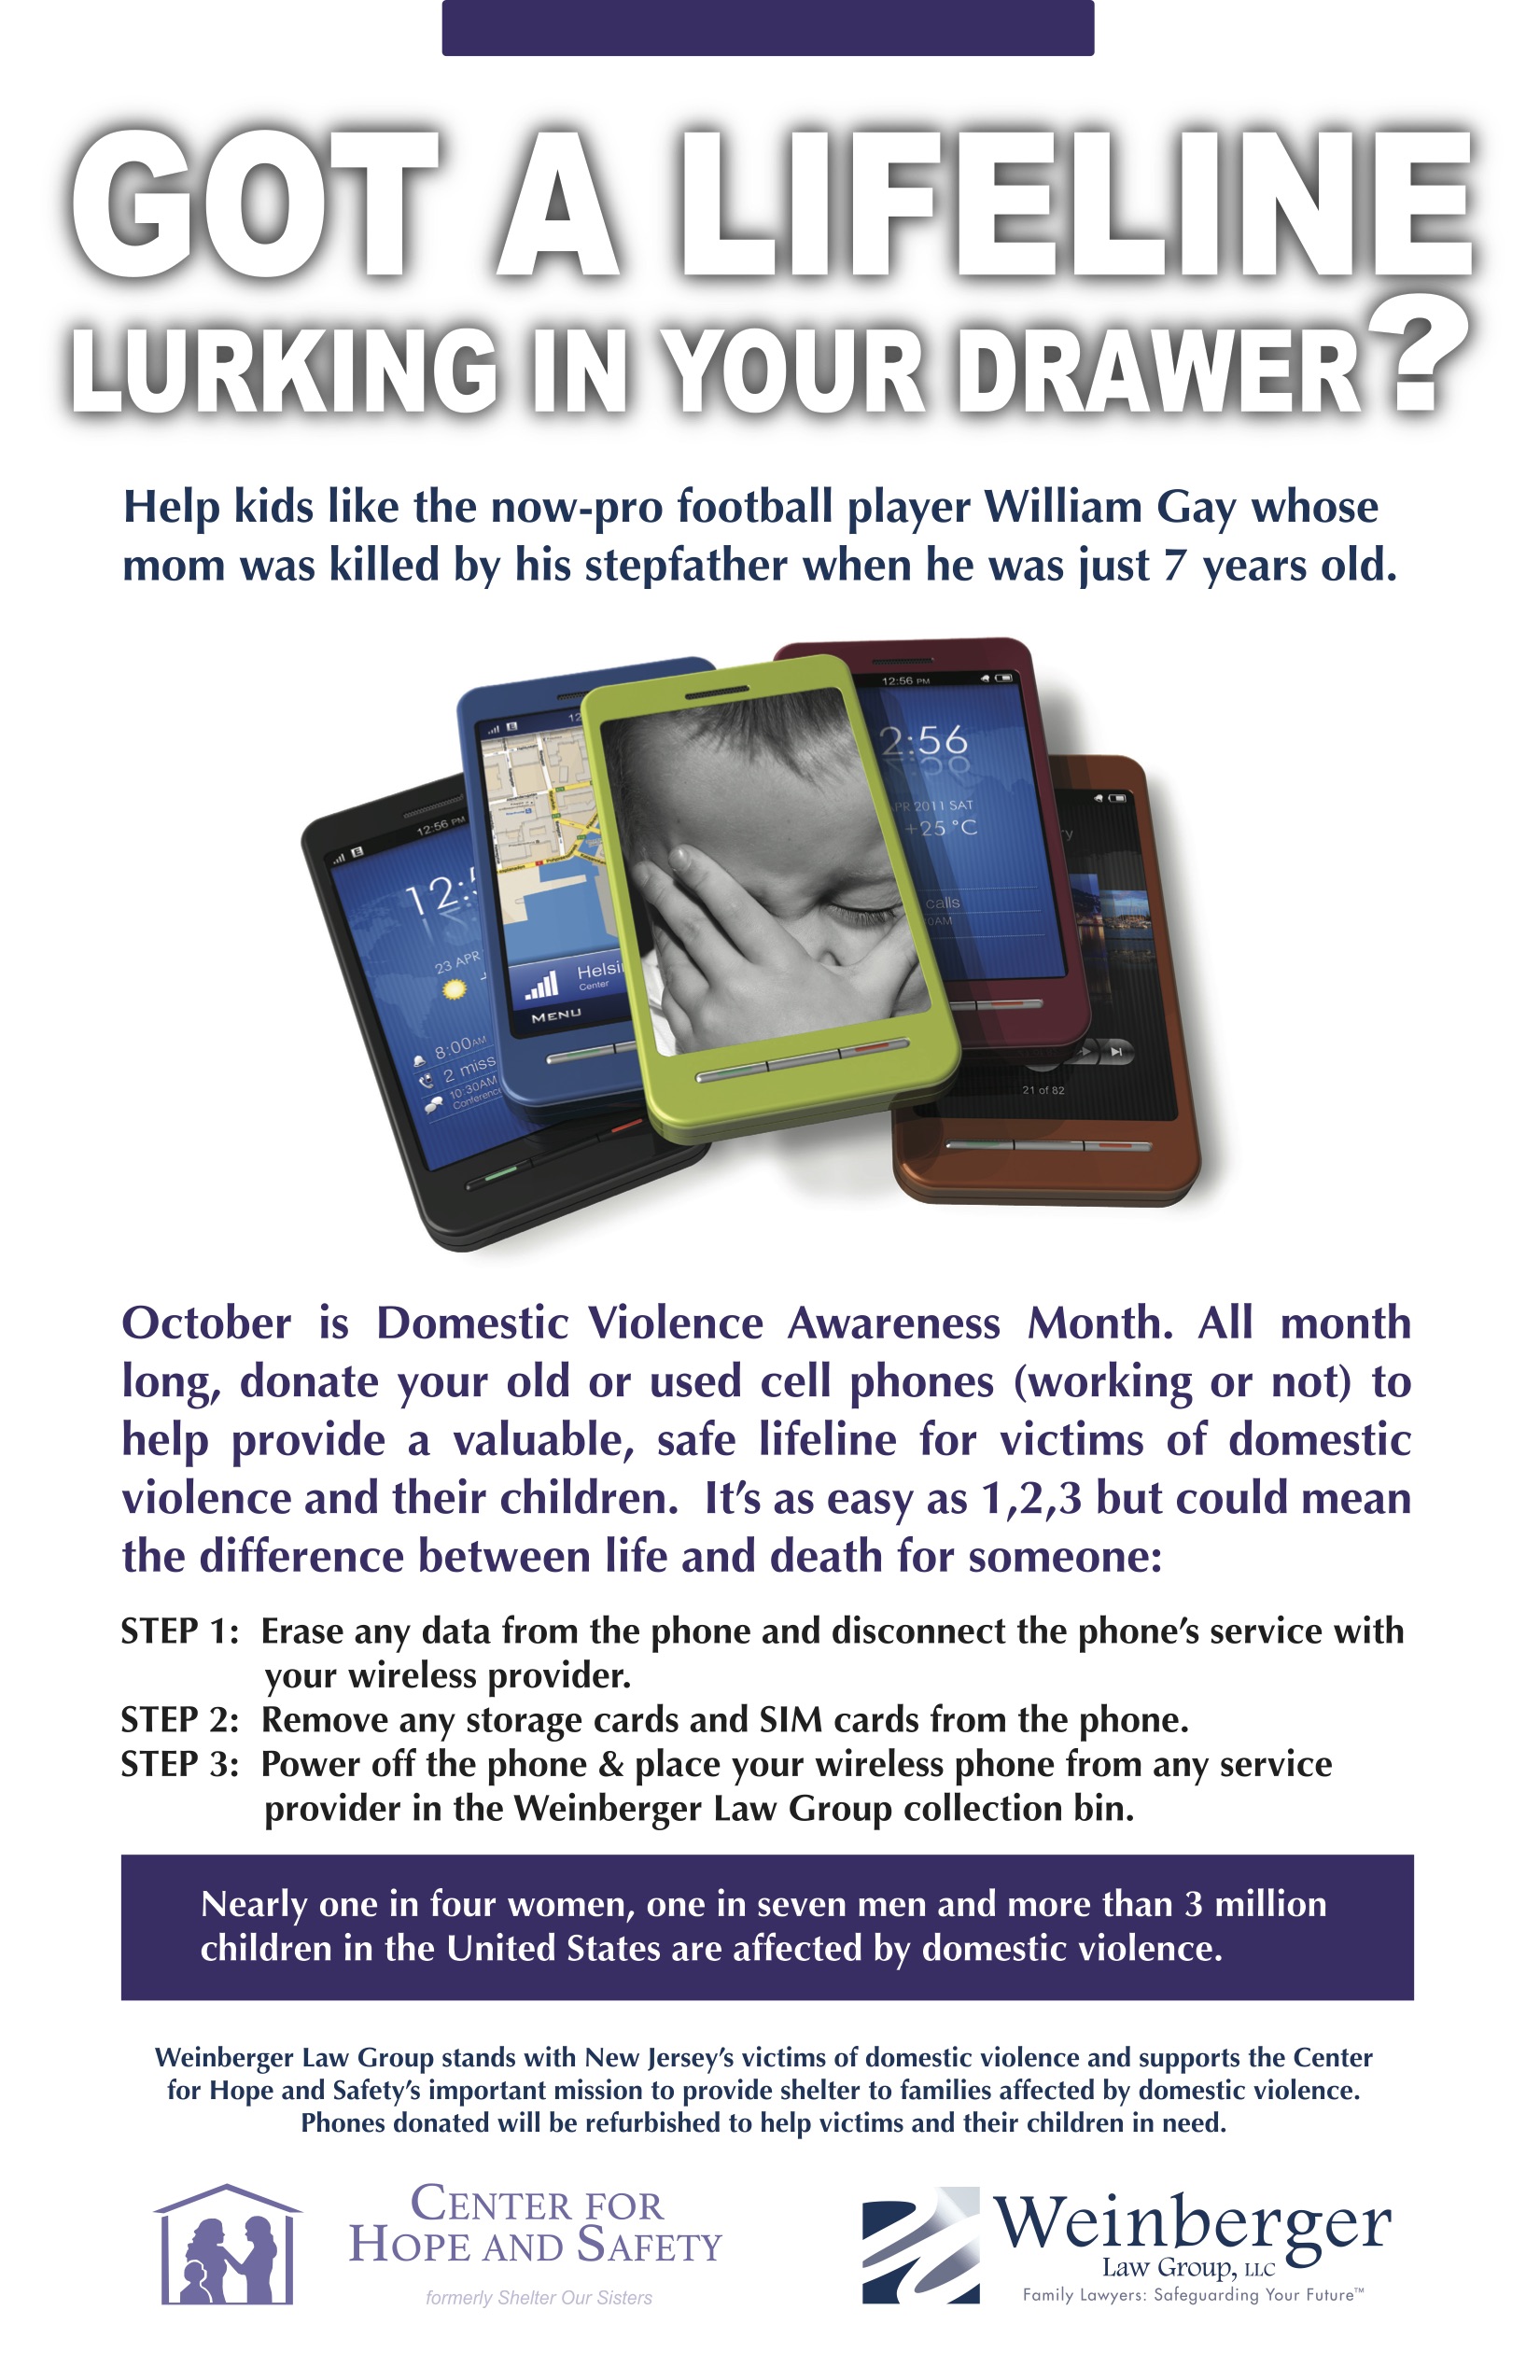 Give Victims a Voice: Donate Used Cell Phones to Aid Local